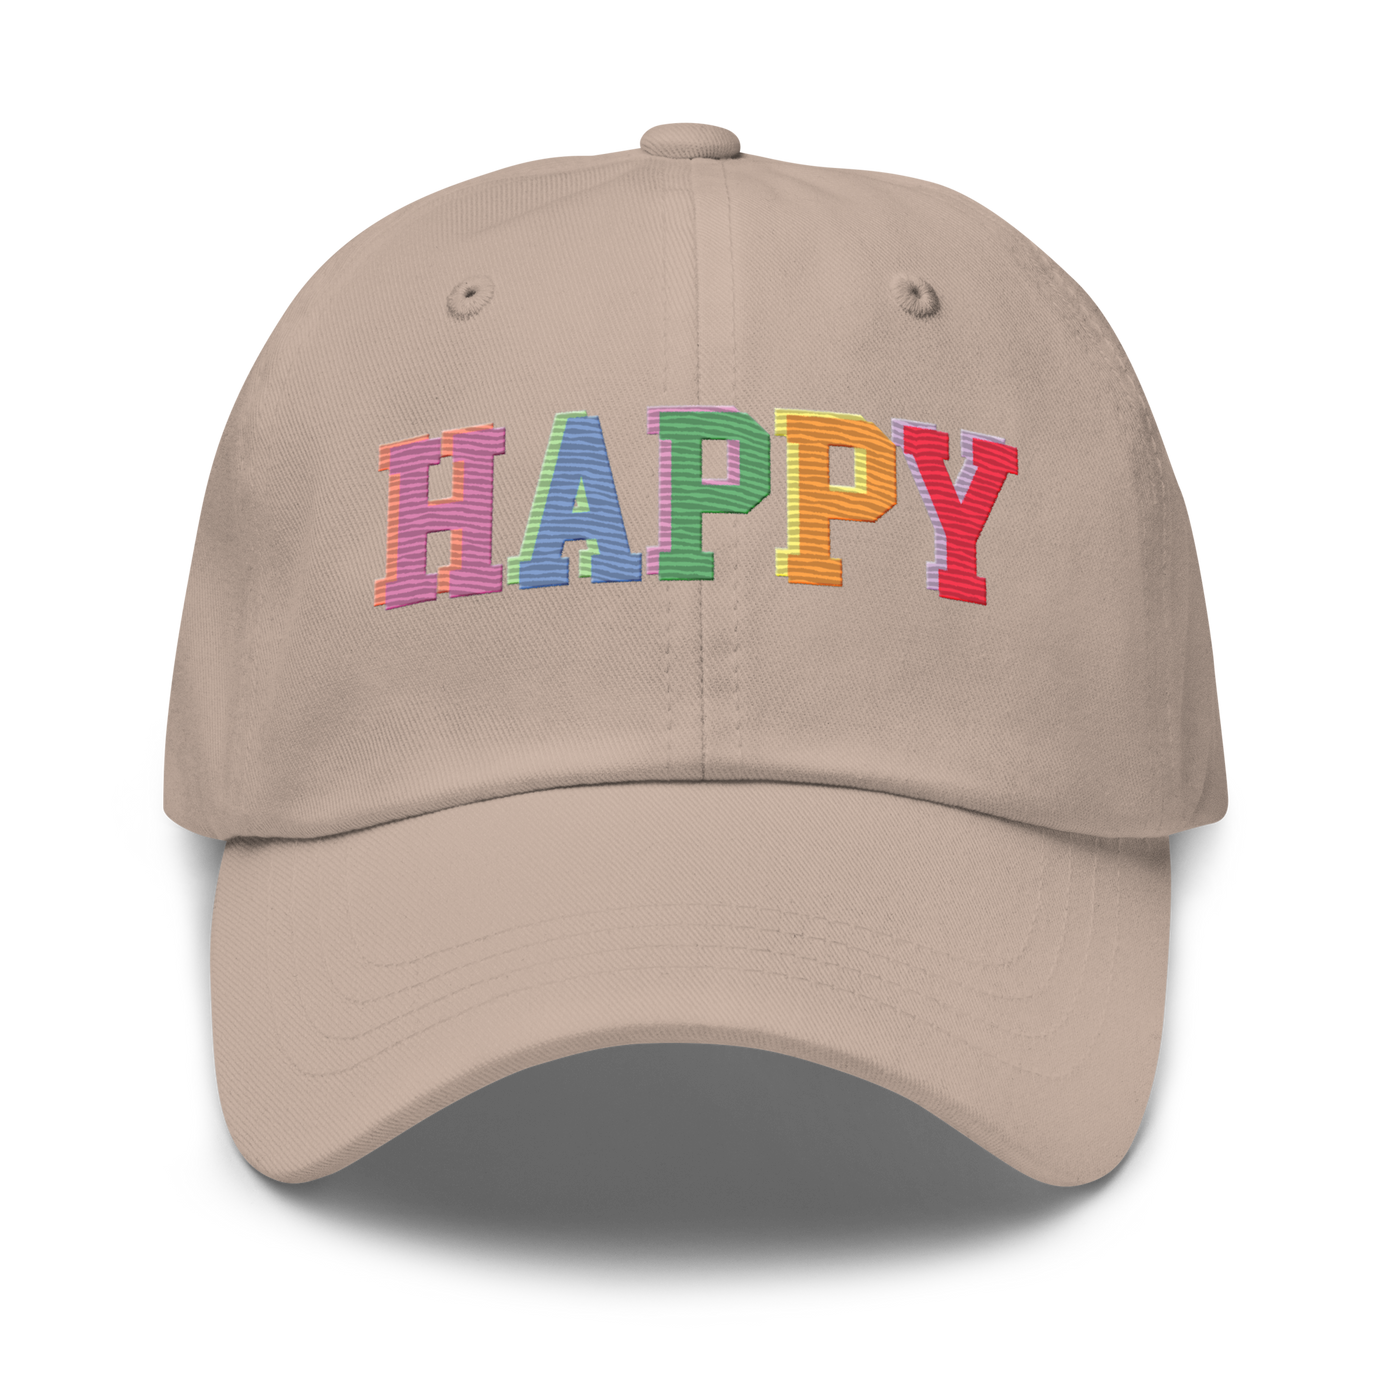 'Happy' Embroidered Hat